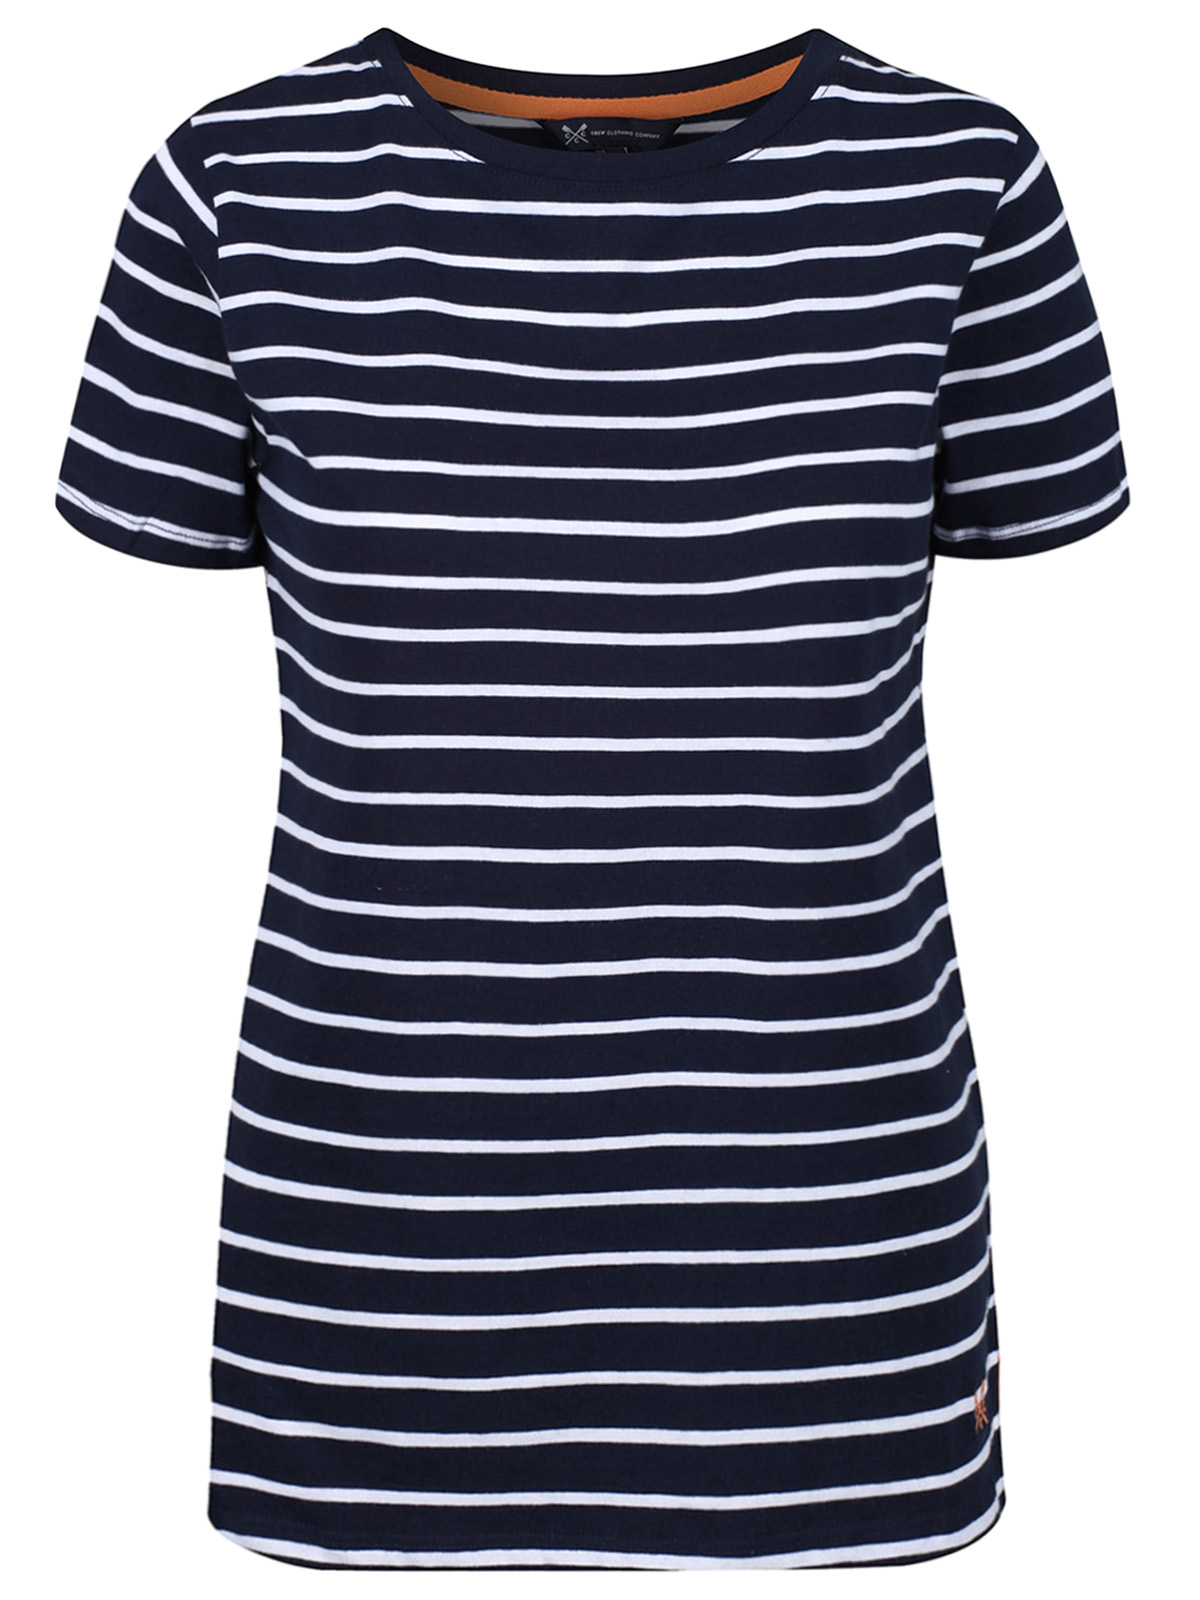 Crew Clothing - - Crew Clothing NAVY/WHITE Pure Cotton Striped Top ...